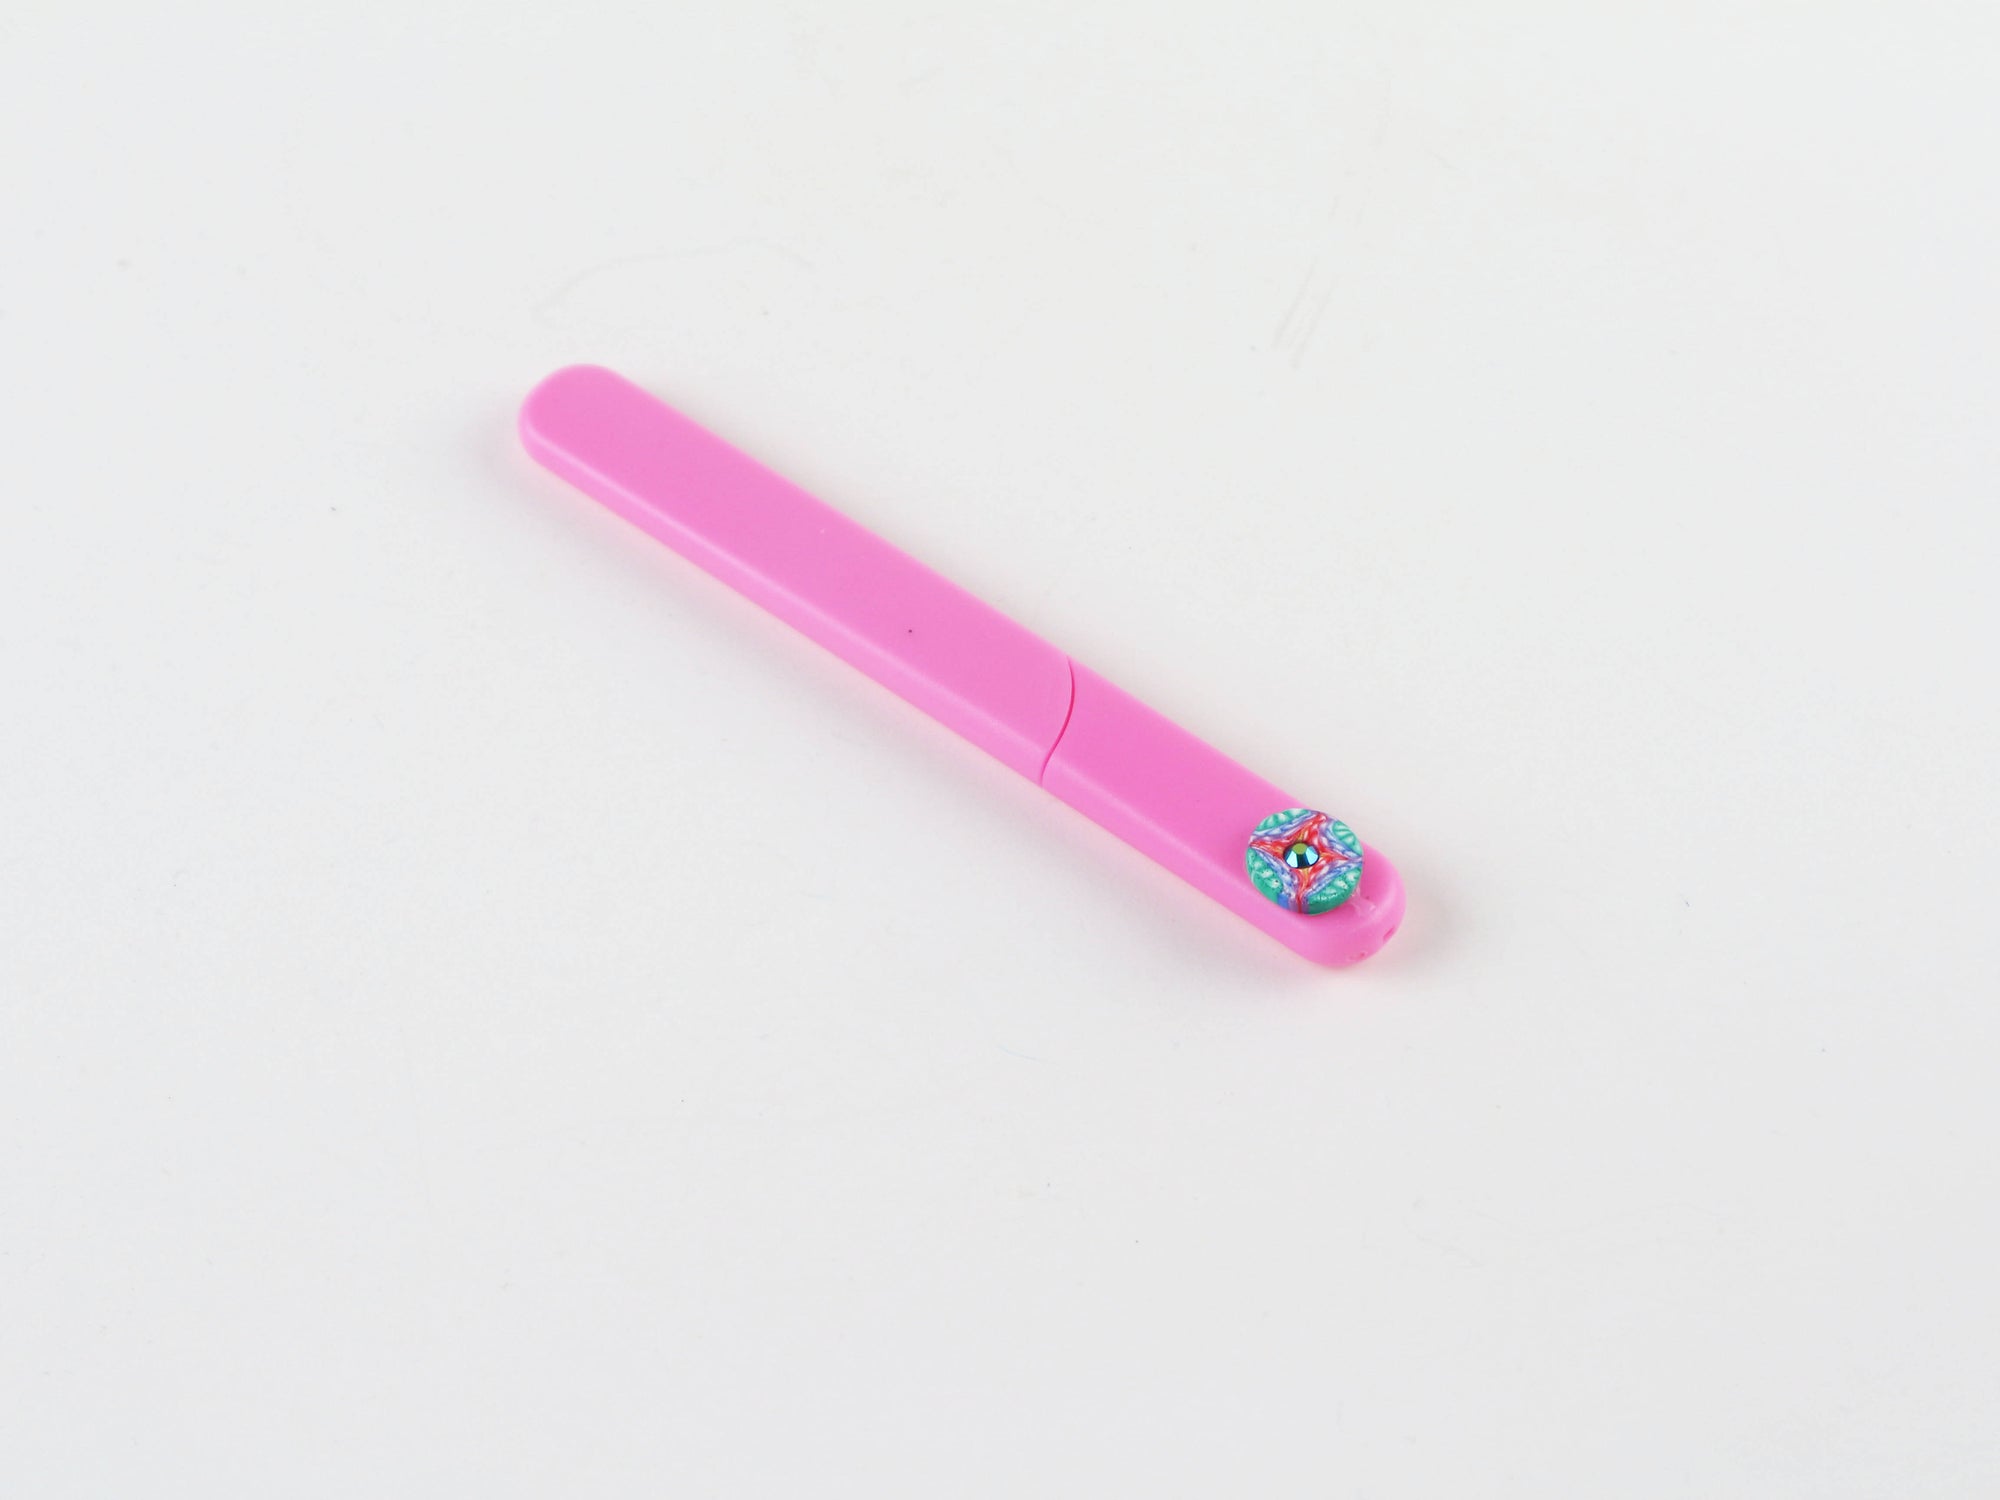 Free Shipping- Crystal Nail File w/ Hard Case- Pink with Flower and Gem Accent